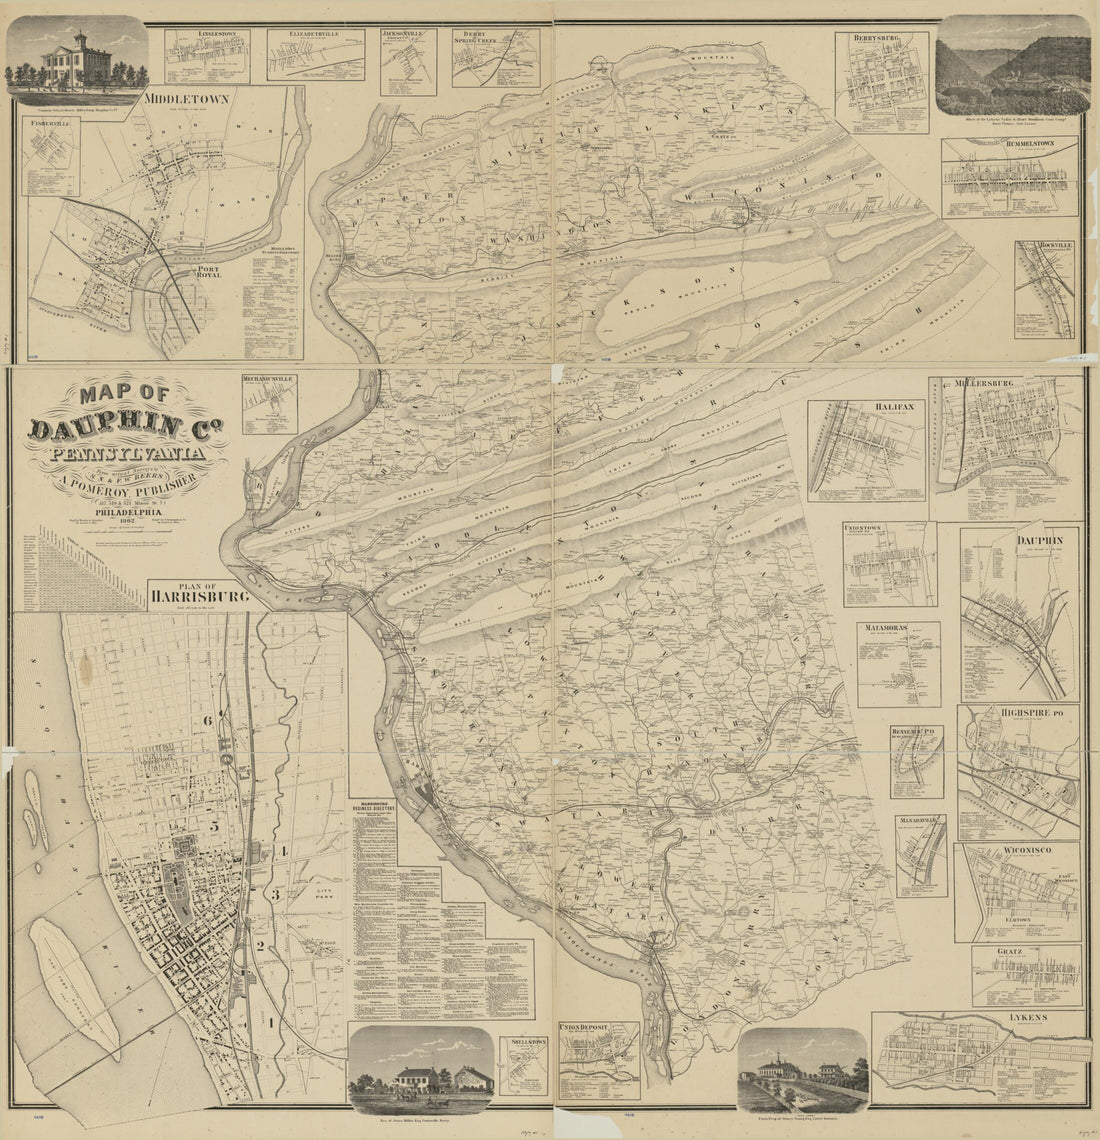 This old map of Map of Dauphin Co., Pennsylvania : from Actual Surveys from 1862 was created by  A. Pomeroy &amp; Co, F. W. (Frederick W.) Beers, S. N. Beers,  F. Bourquin &amp; Co,  Worley &amp; Bracher in 1862